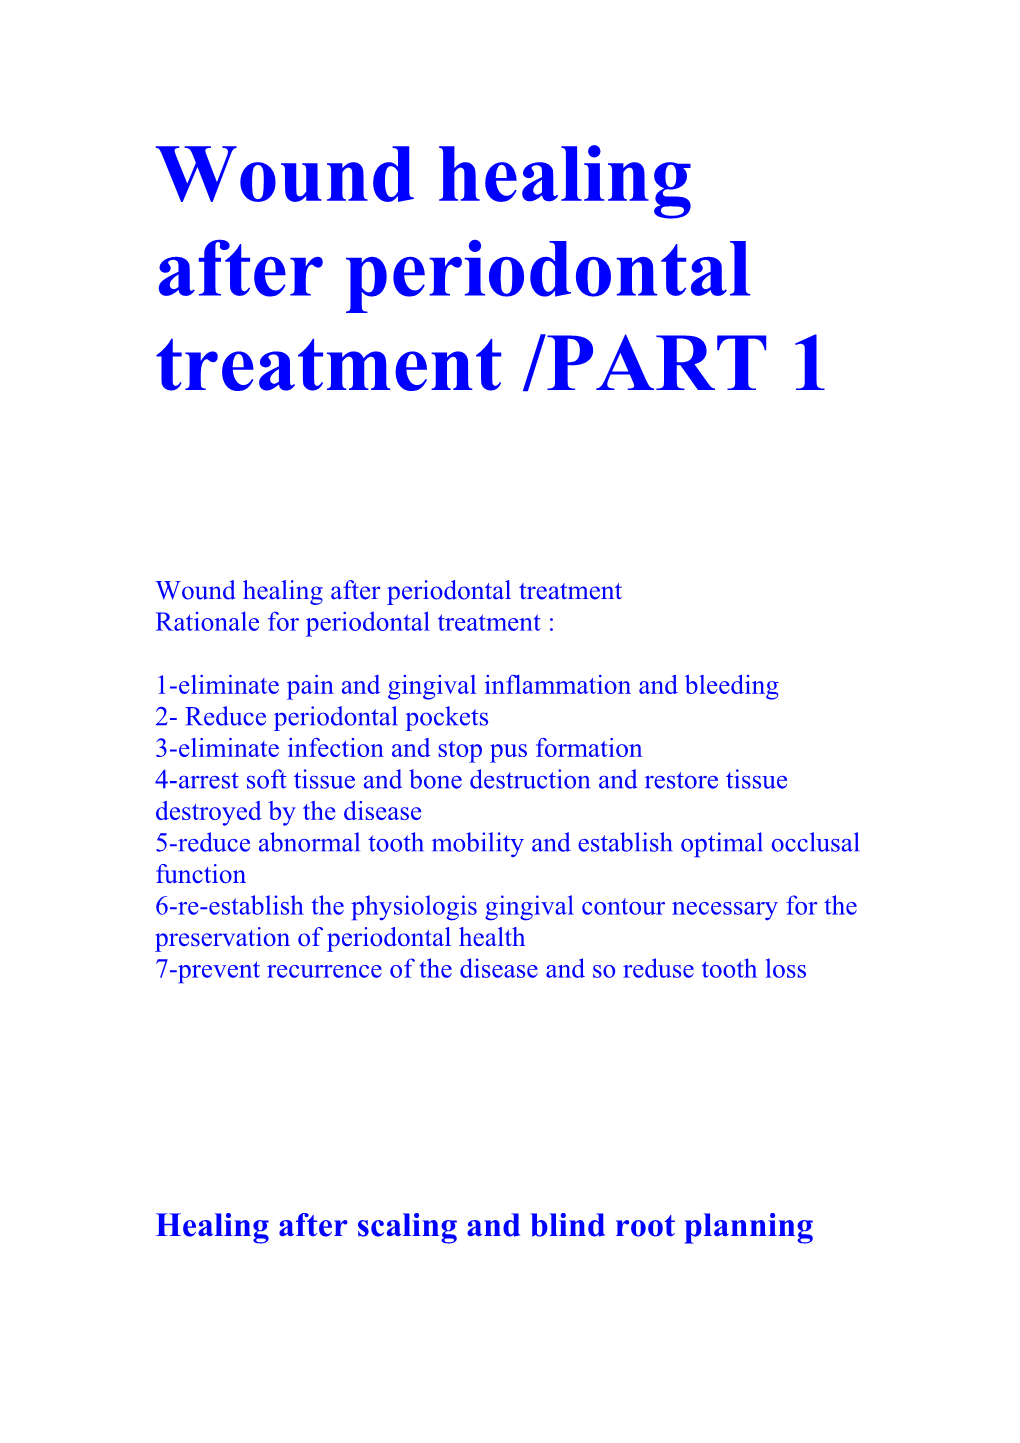 Wound Healing After Periodontal Treatment/PART 1